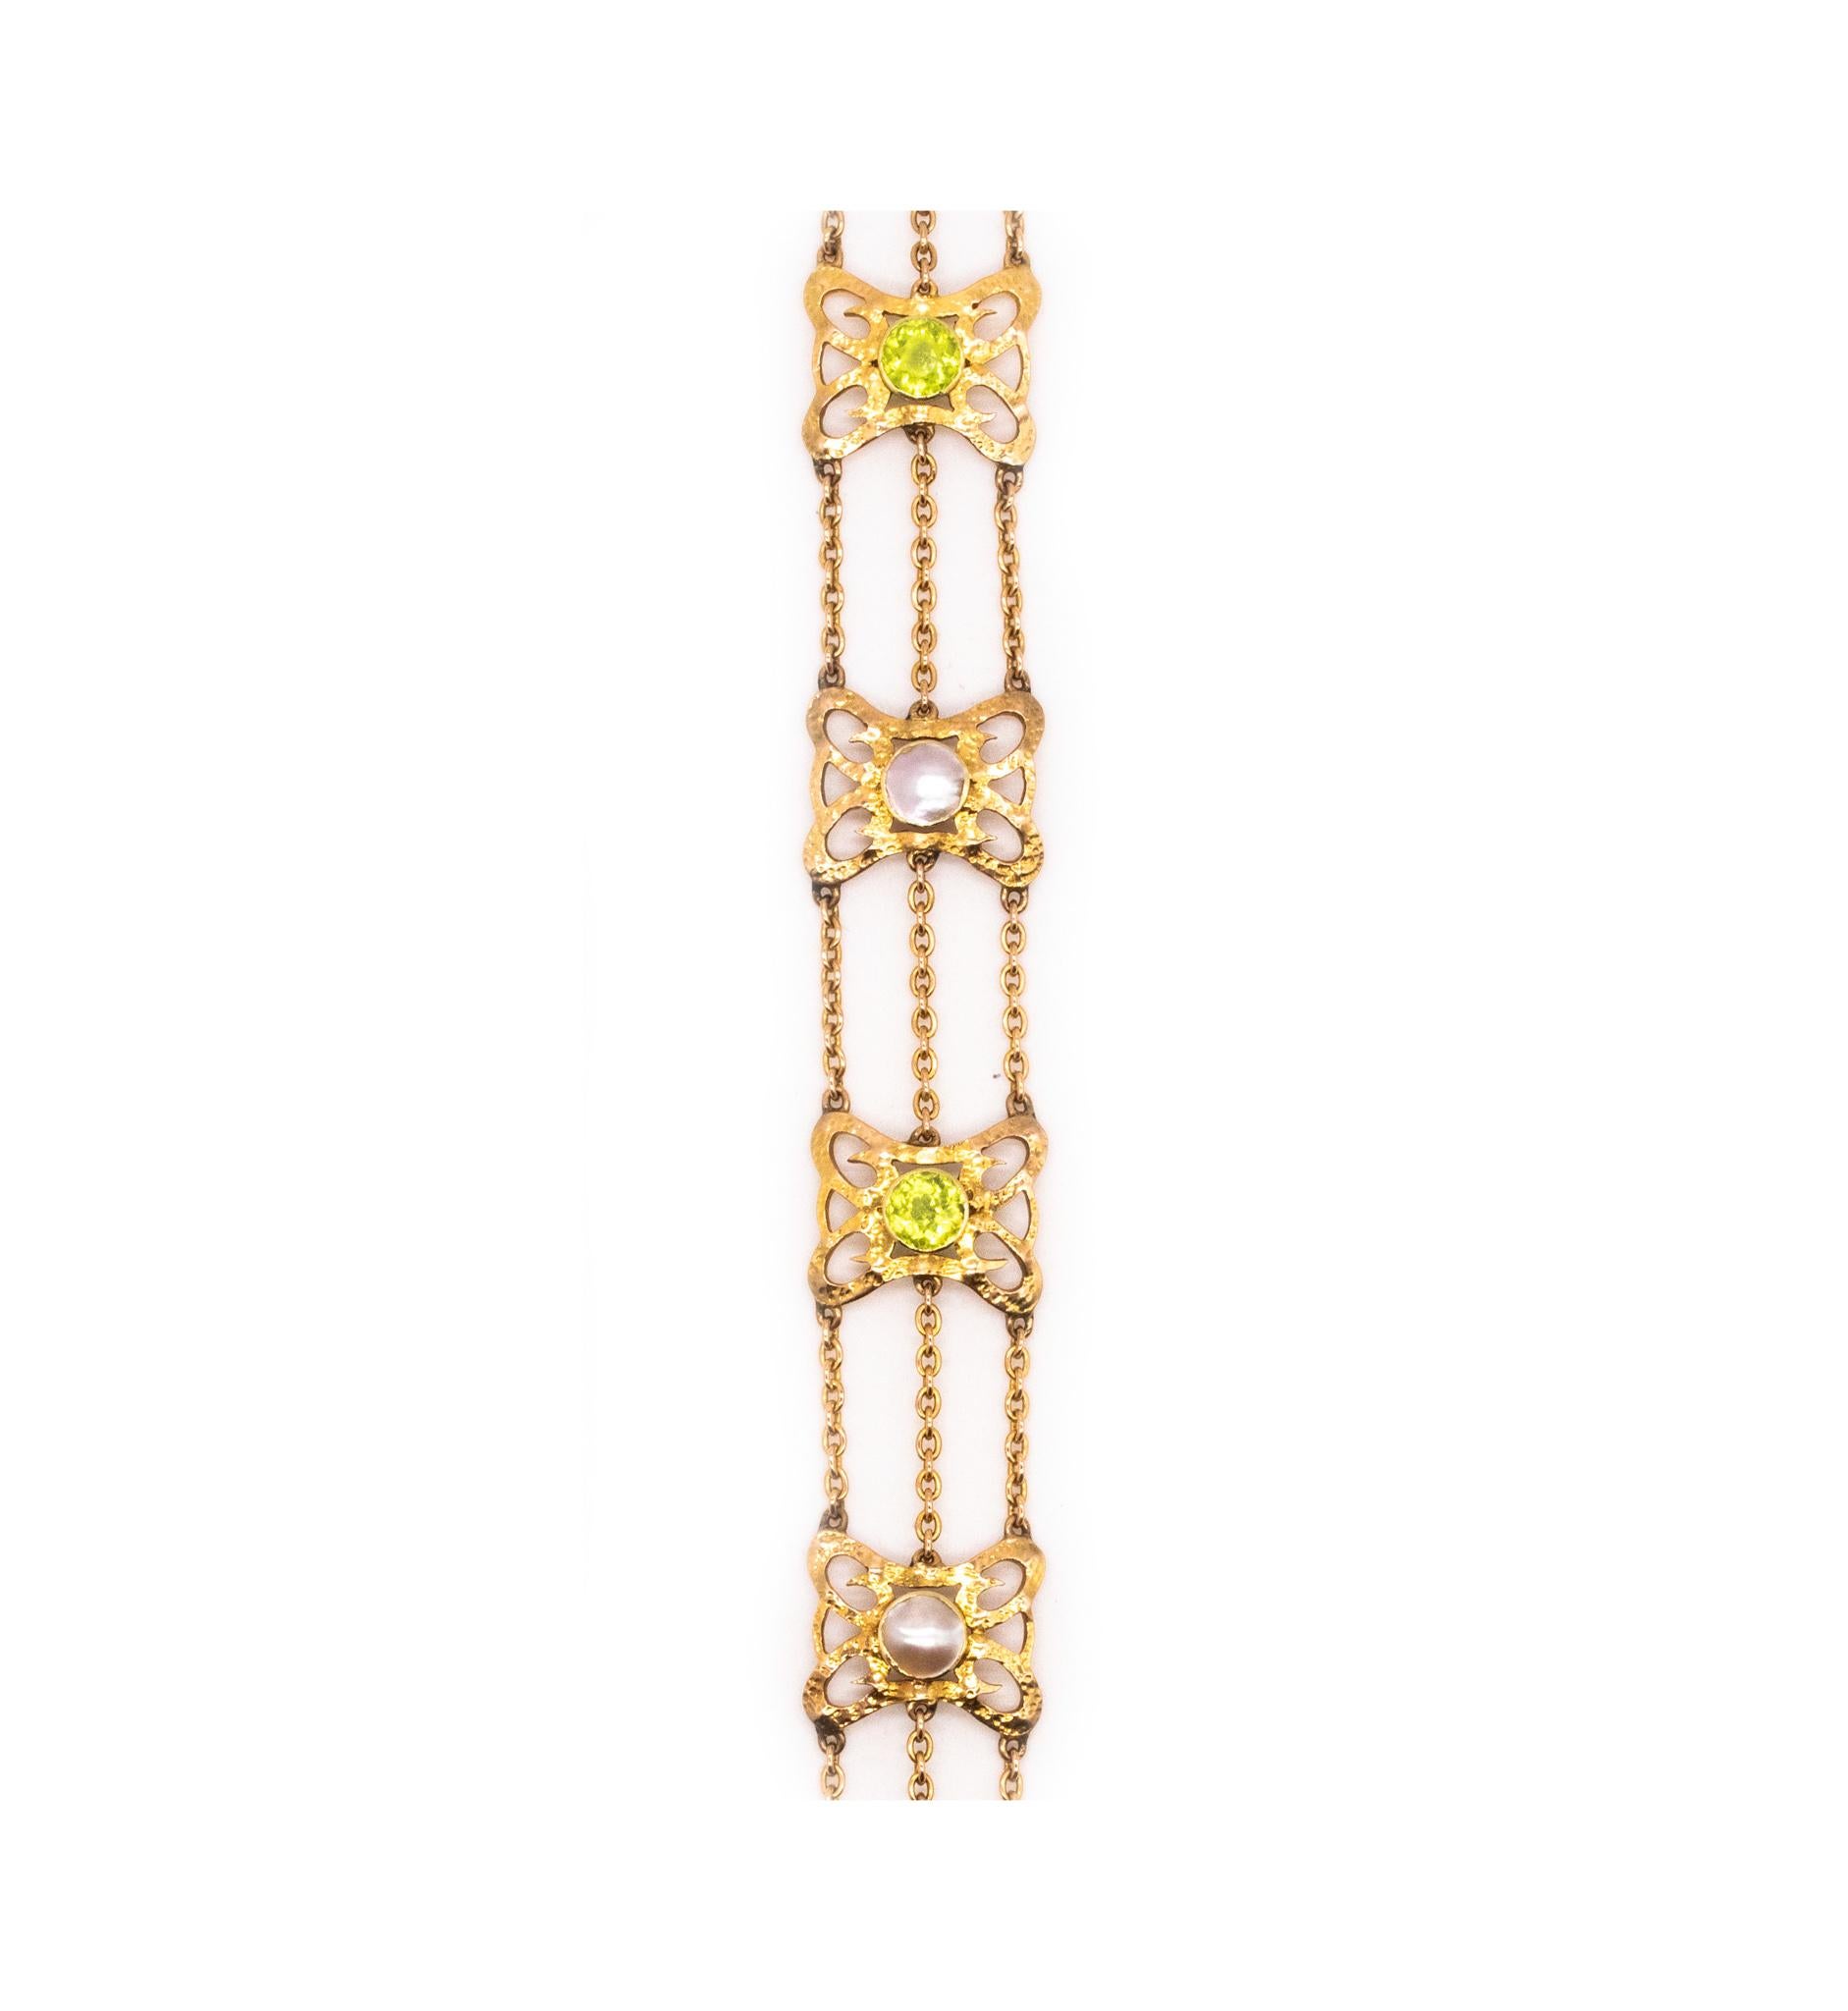 Women's British 1900 Liberty Art and Craft Bracelet in 15 Cts with Pearls and Peridots For Sale